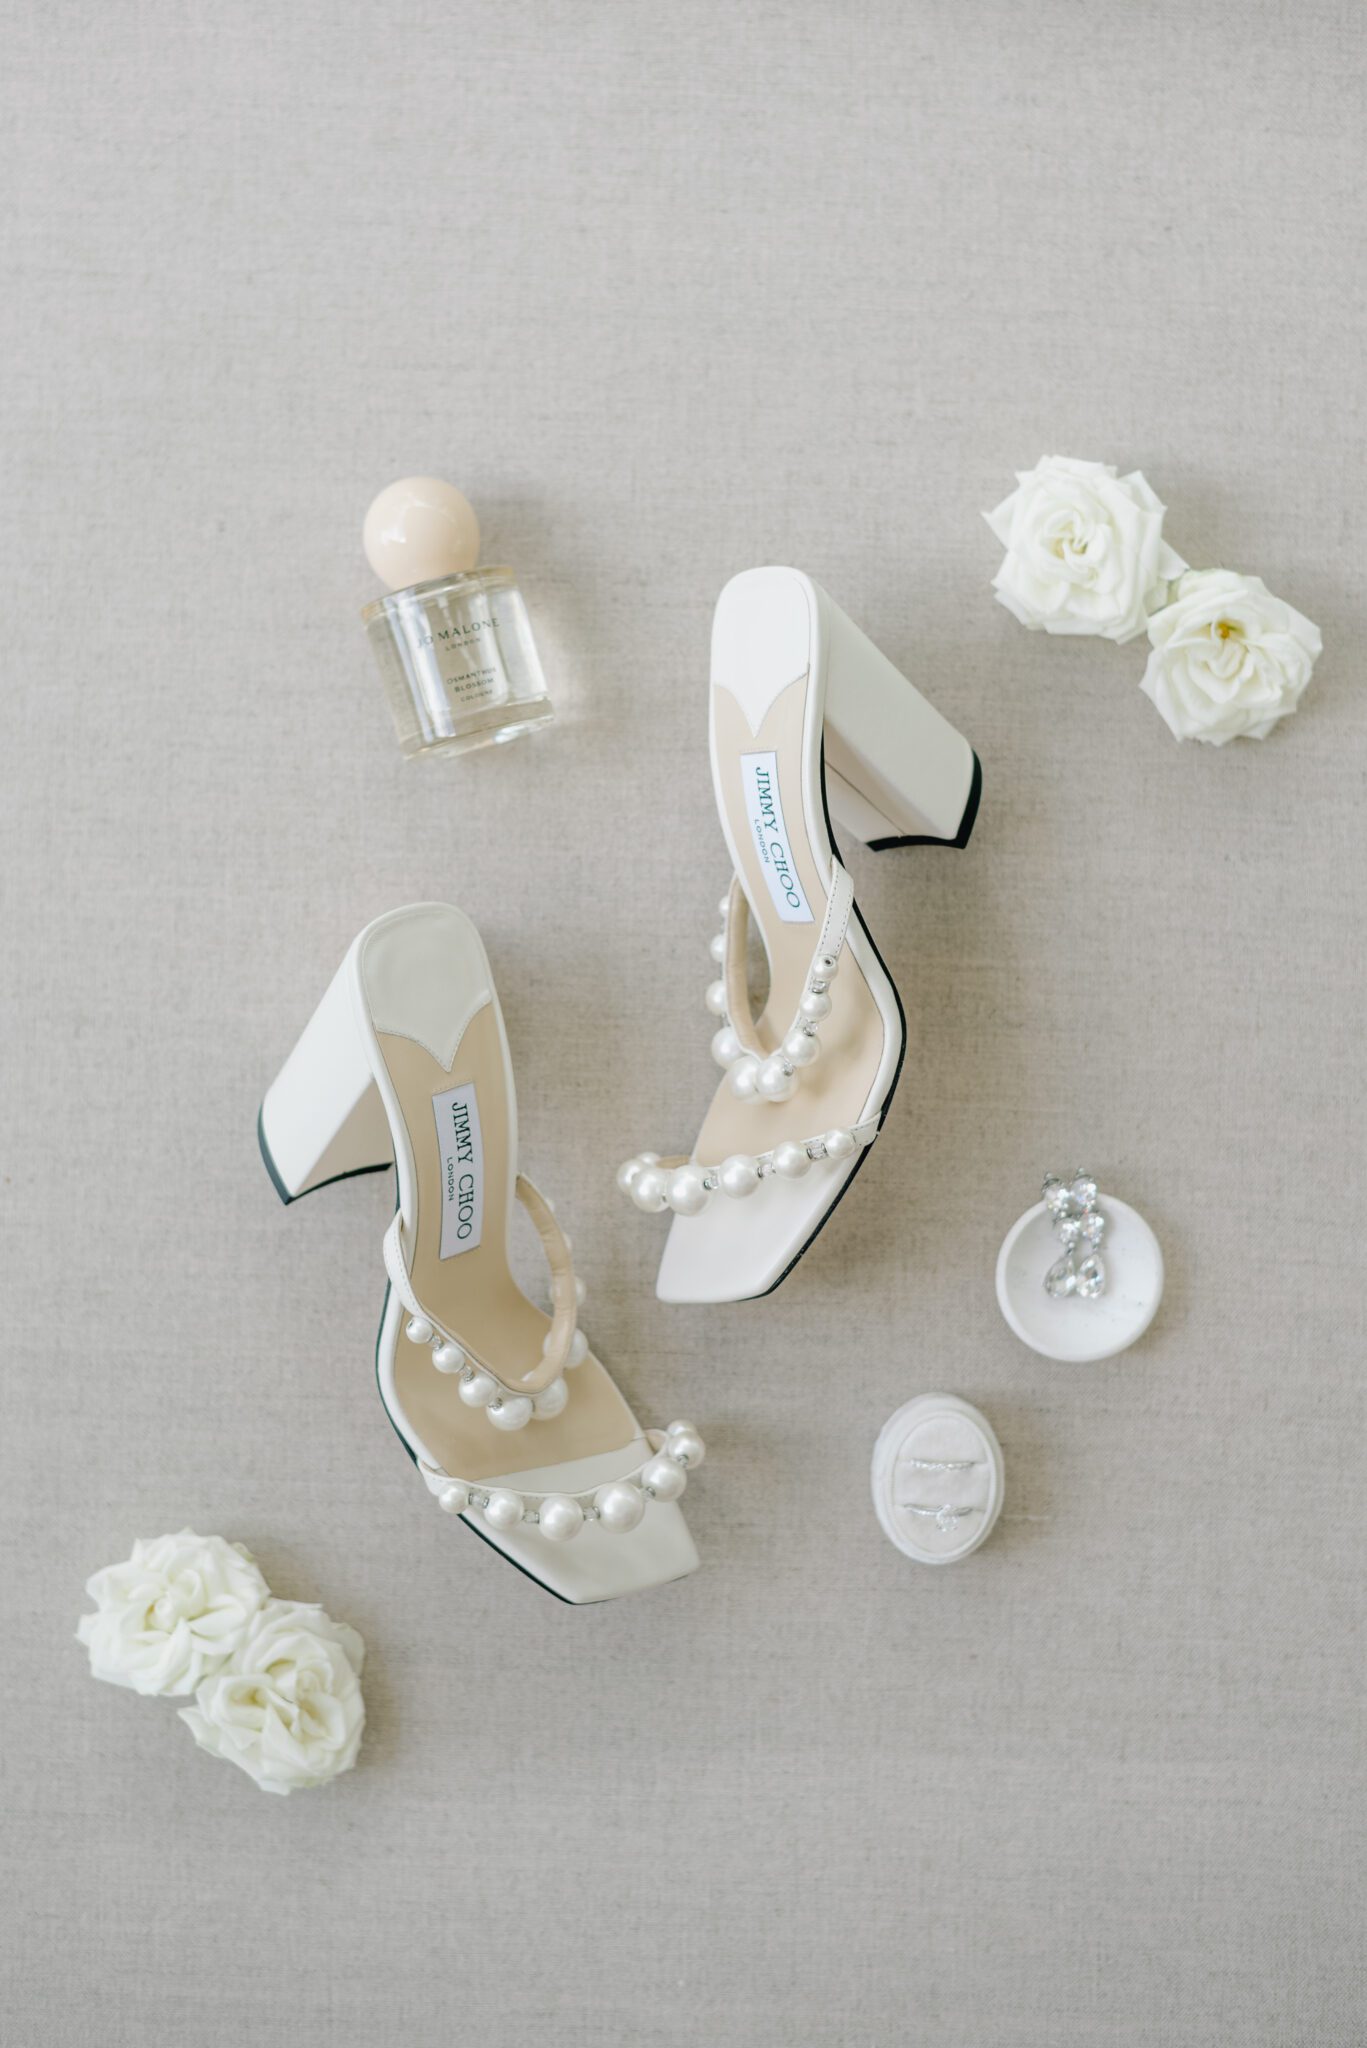 Classic and elegant bridal details featuring Jimmy Choo shoes with large pearl straps, Jo Malone perfume captured by Jenny Jean Photography.